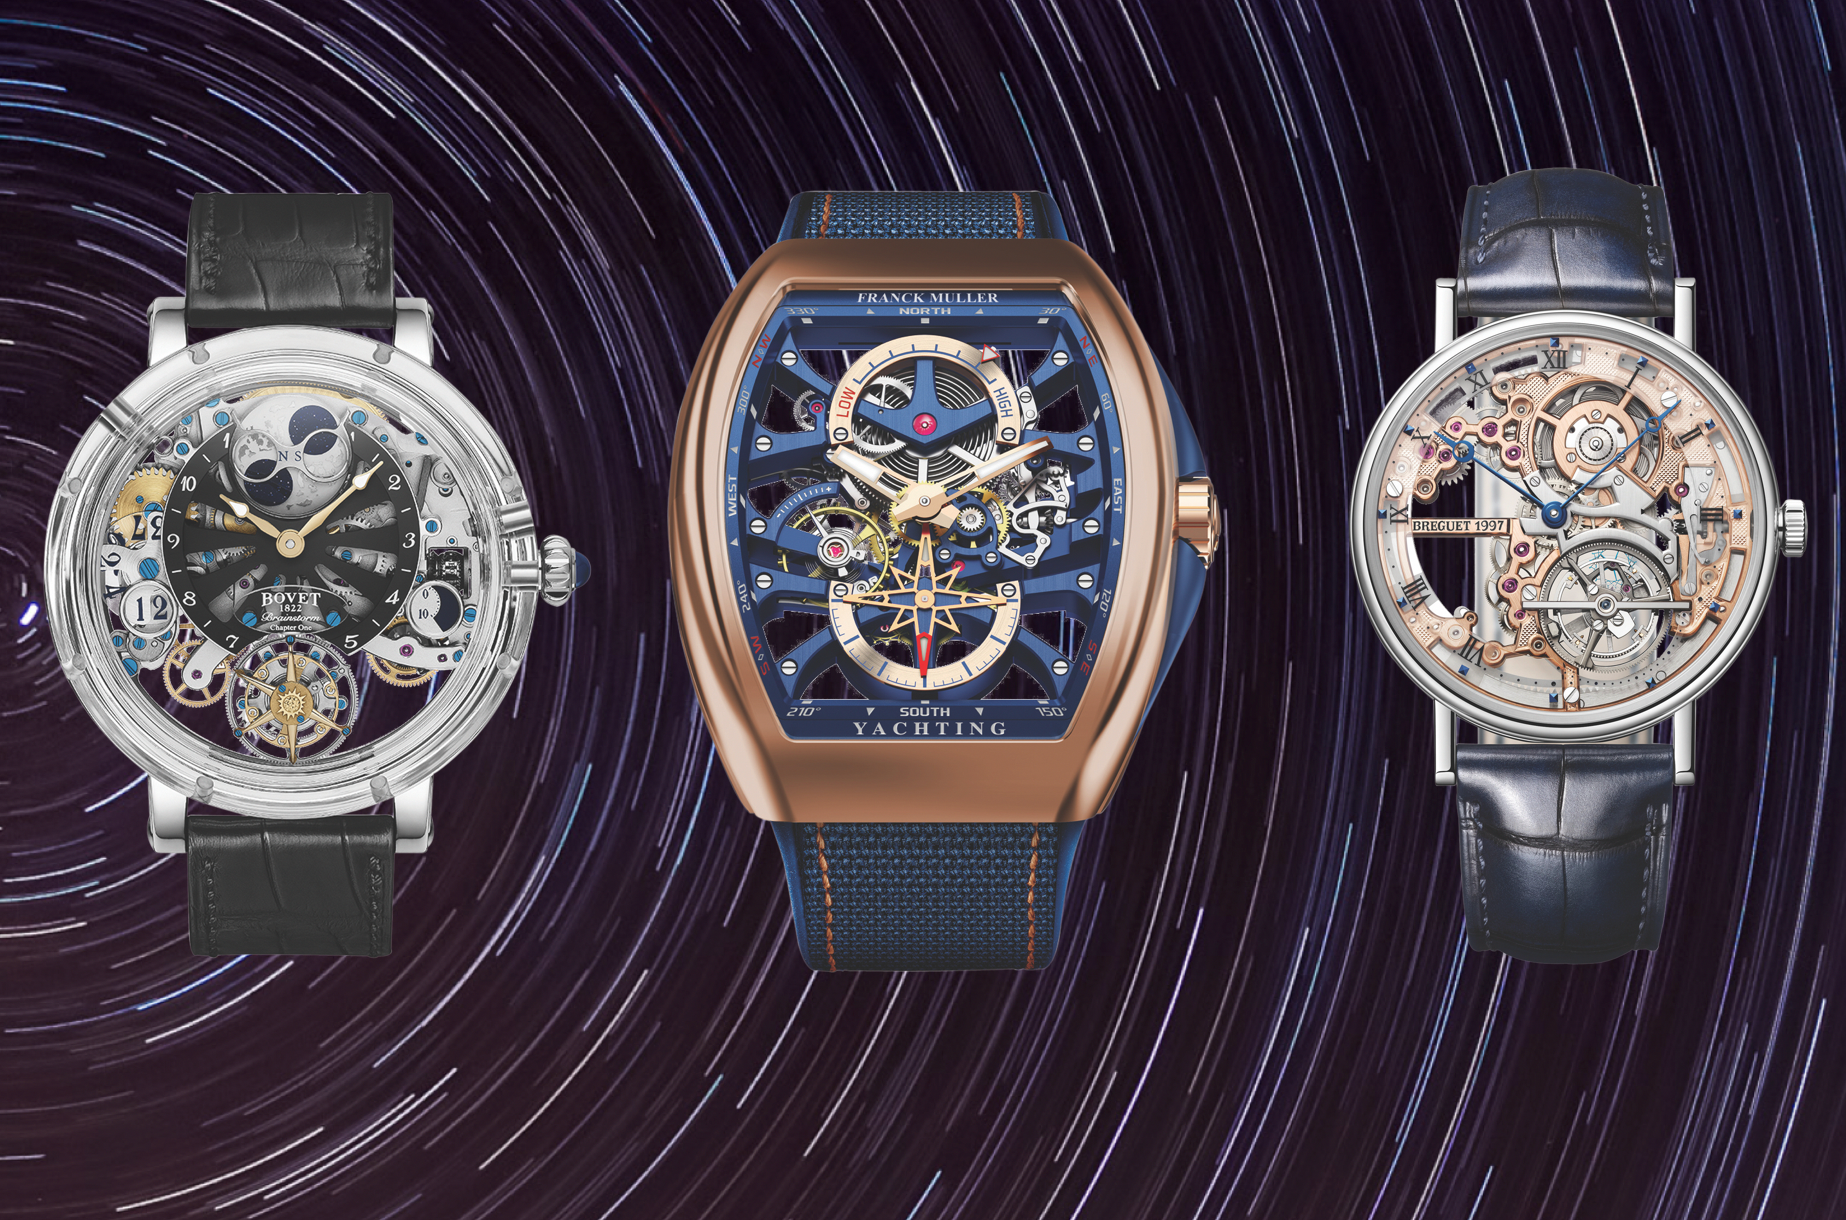 Revealed: The Elite Traveler Top 50 Watches of 2019